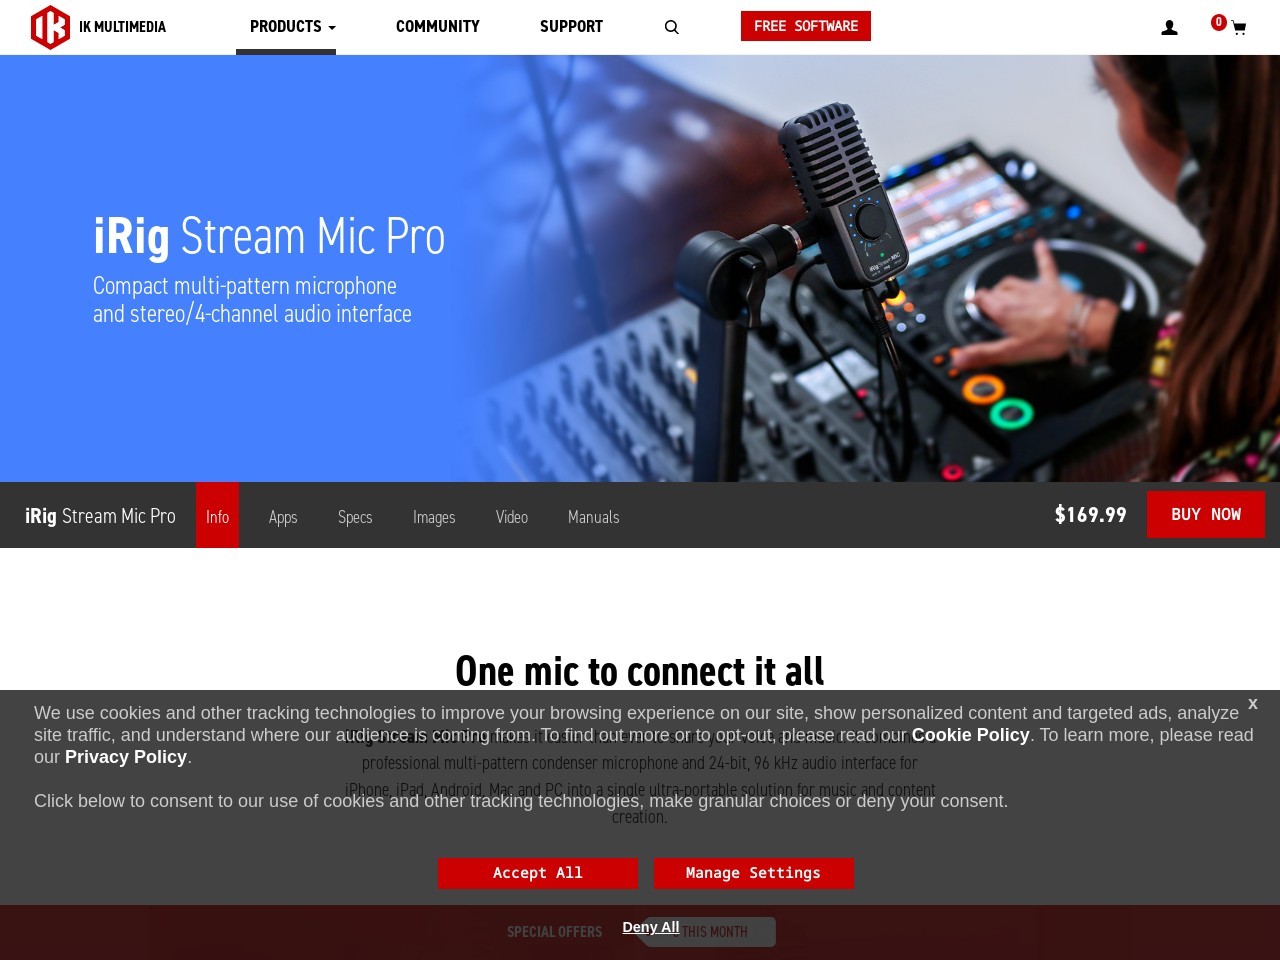 iRig Stream Mic Pro - Compact multi-pattern microphone and stereo/4-channel audio interface